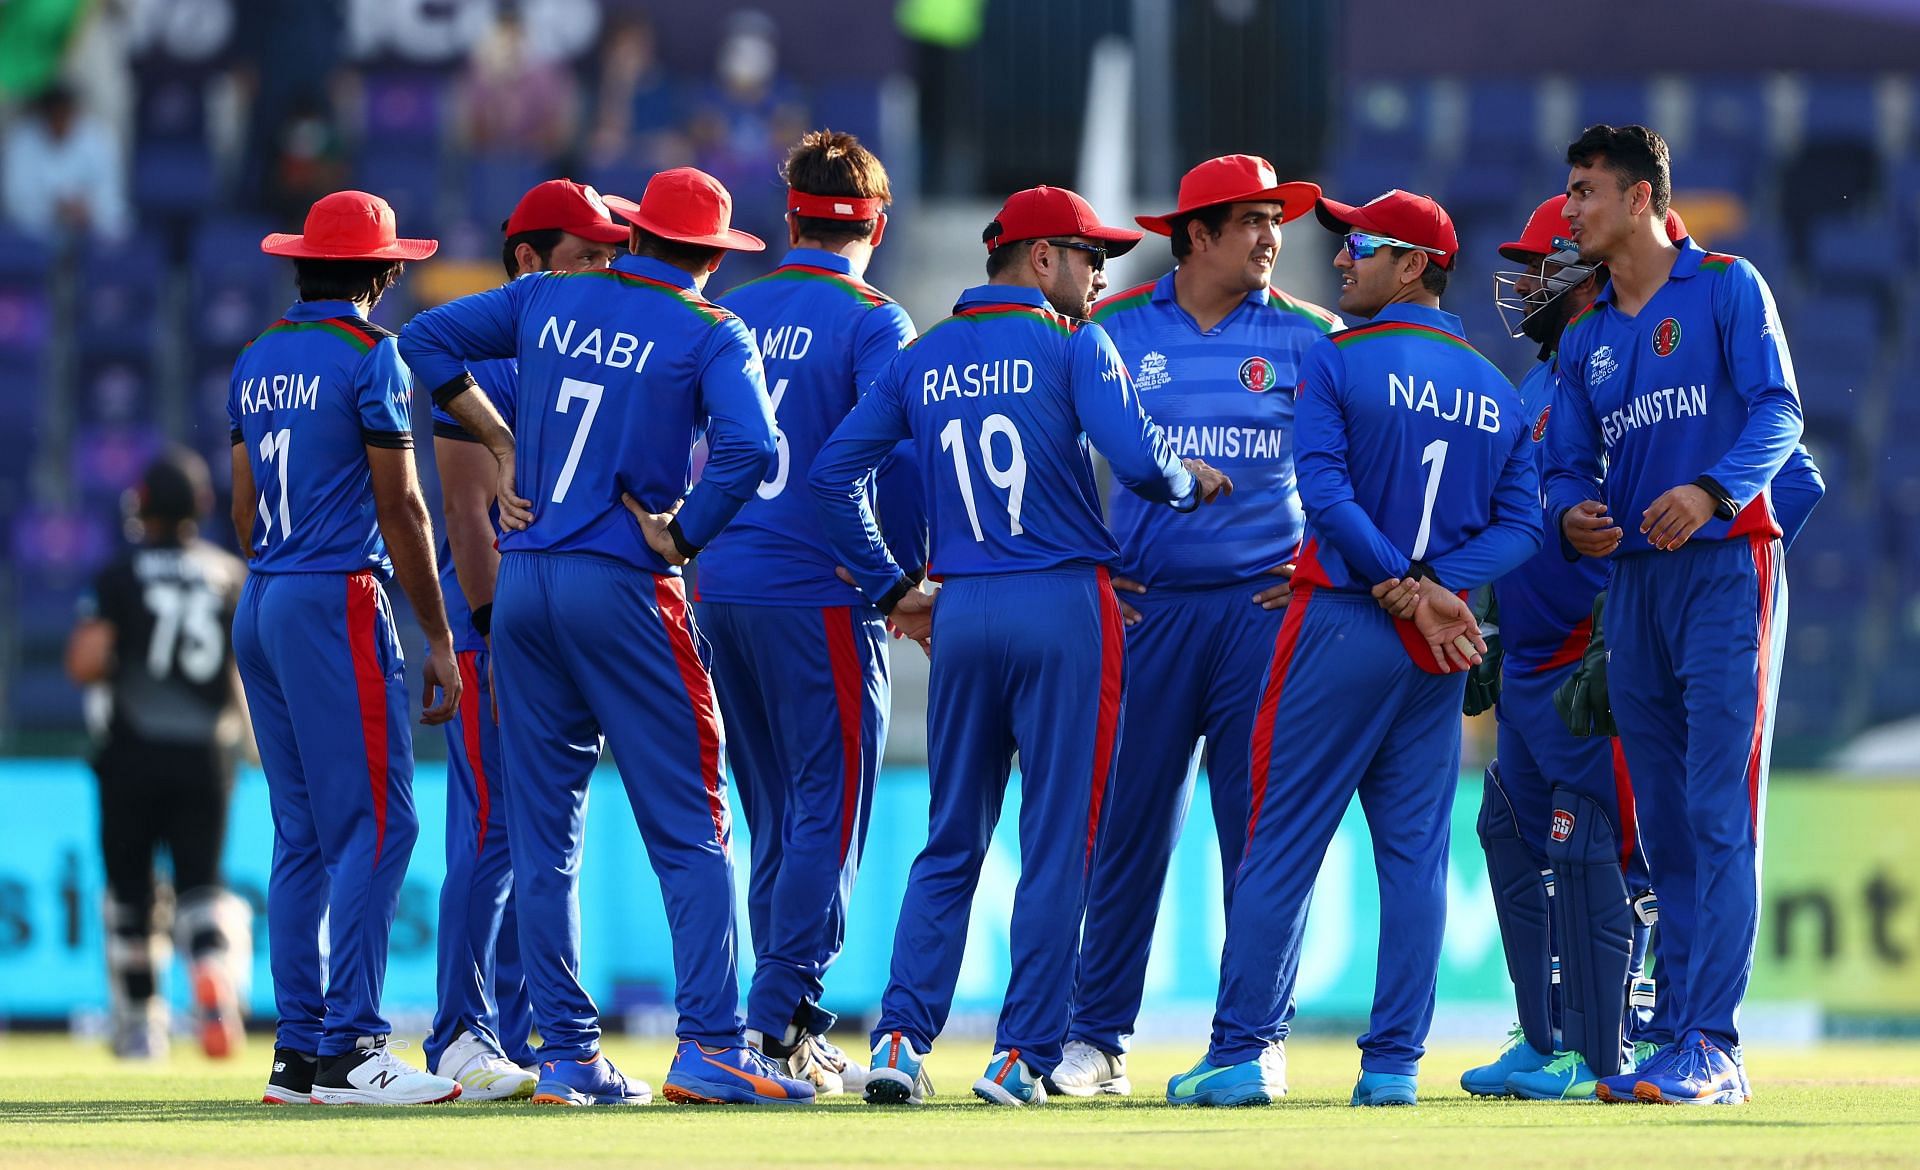 Afghanistan cricket team during the 2021 T20 World Cup. Pic: Getty Images